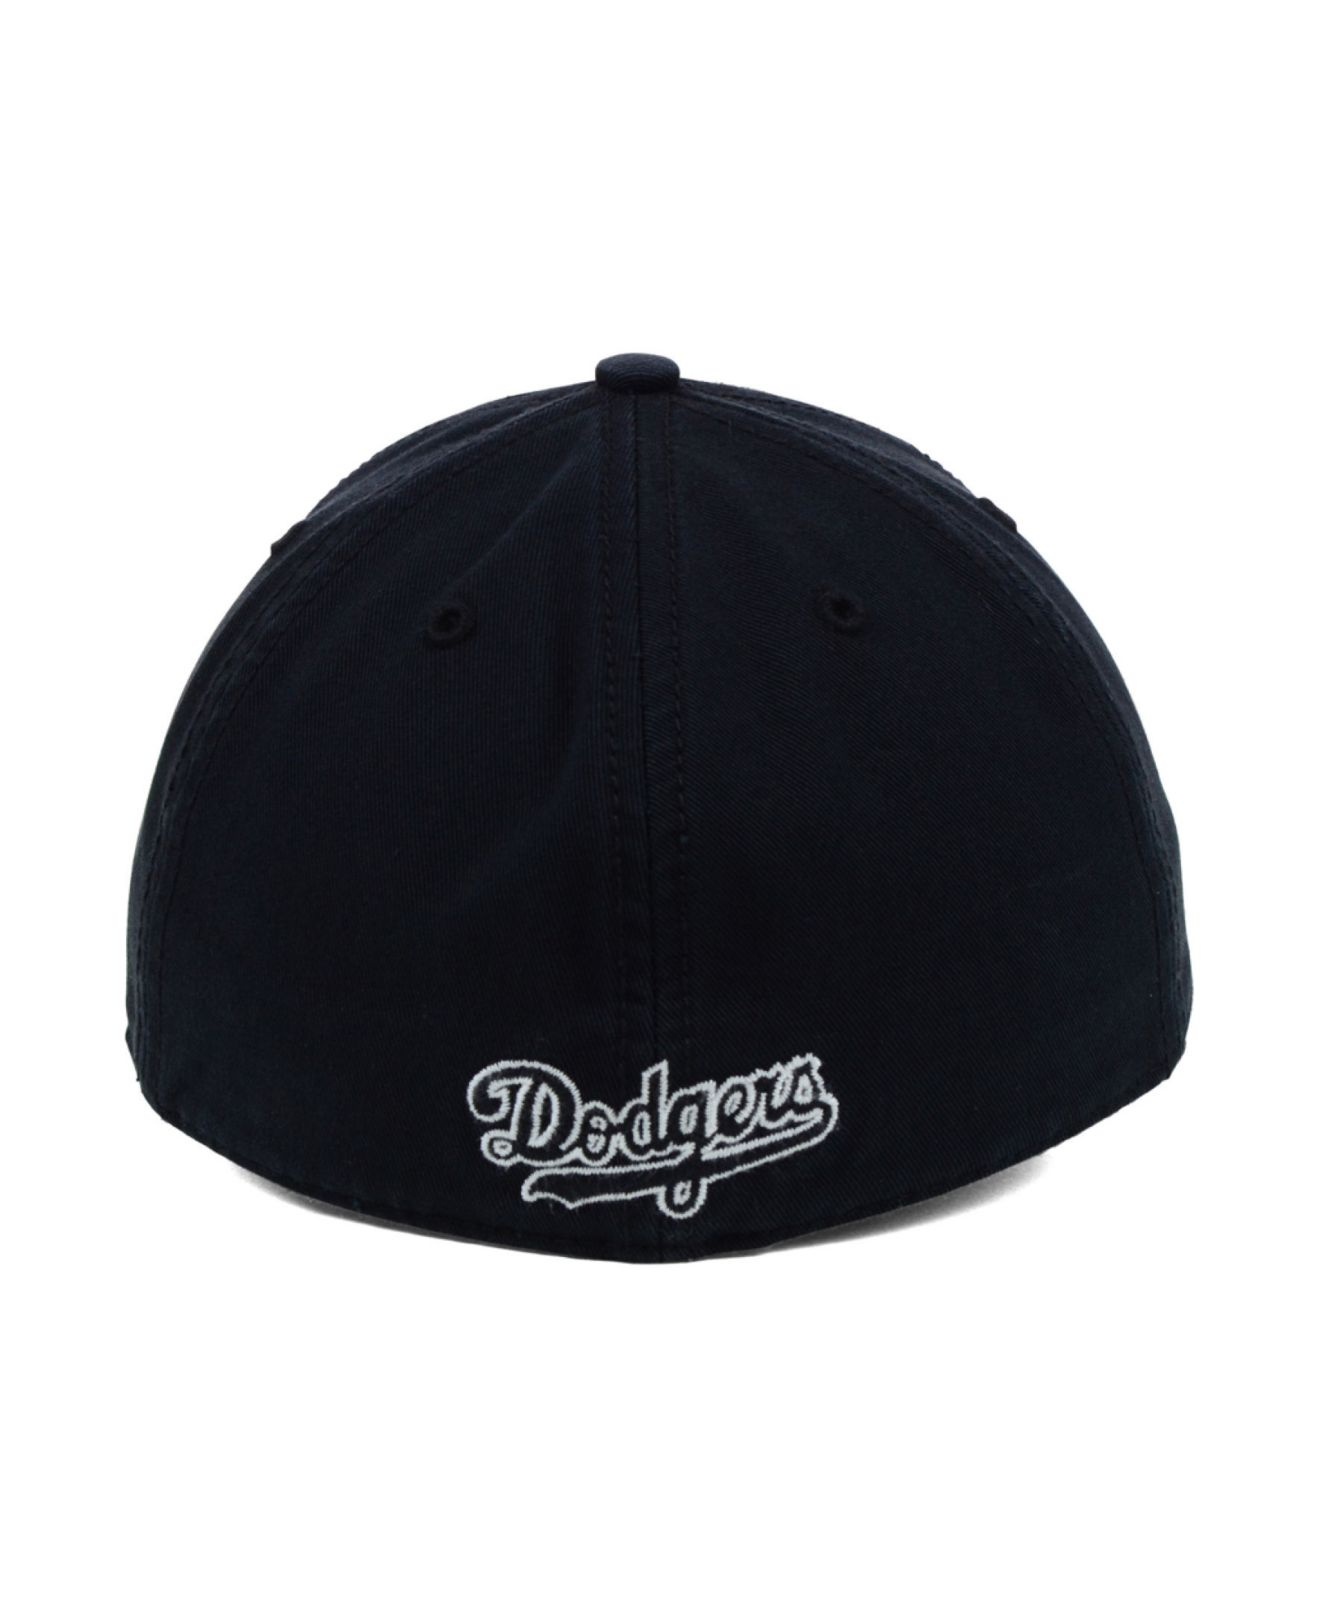 Lyst - 47 Brand Brooklyn Dodgers Black Out Franchise Cap in Black for Men